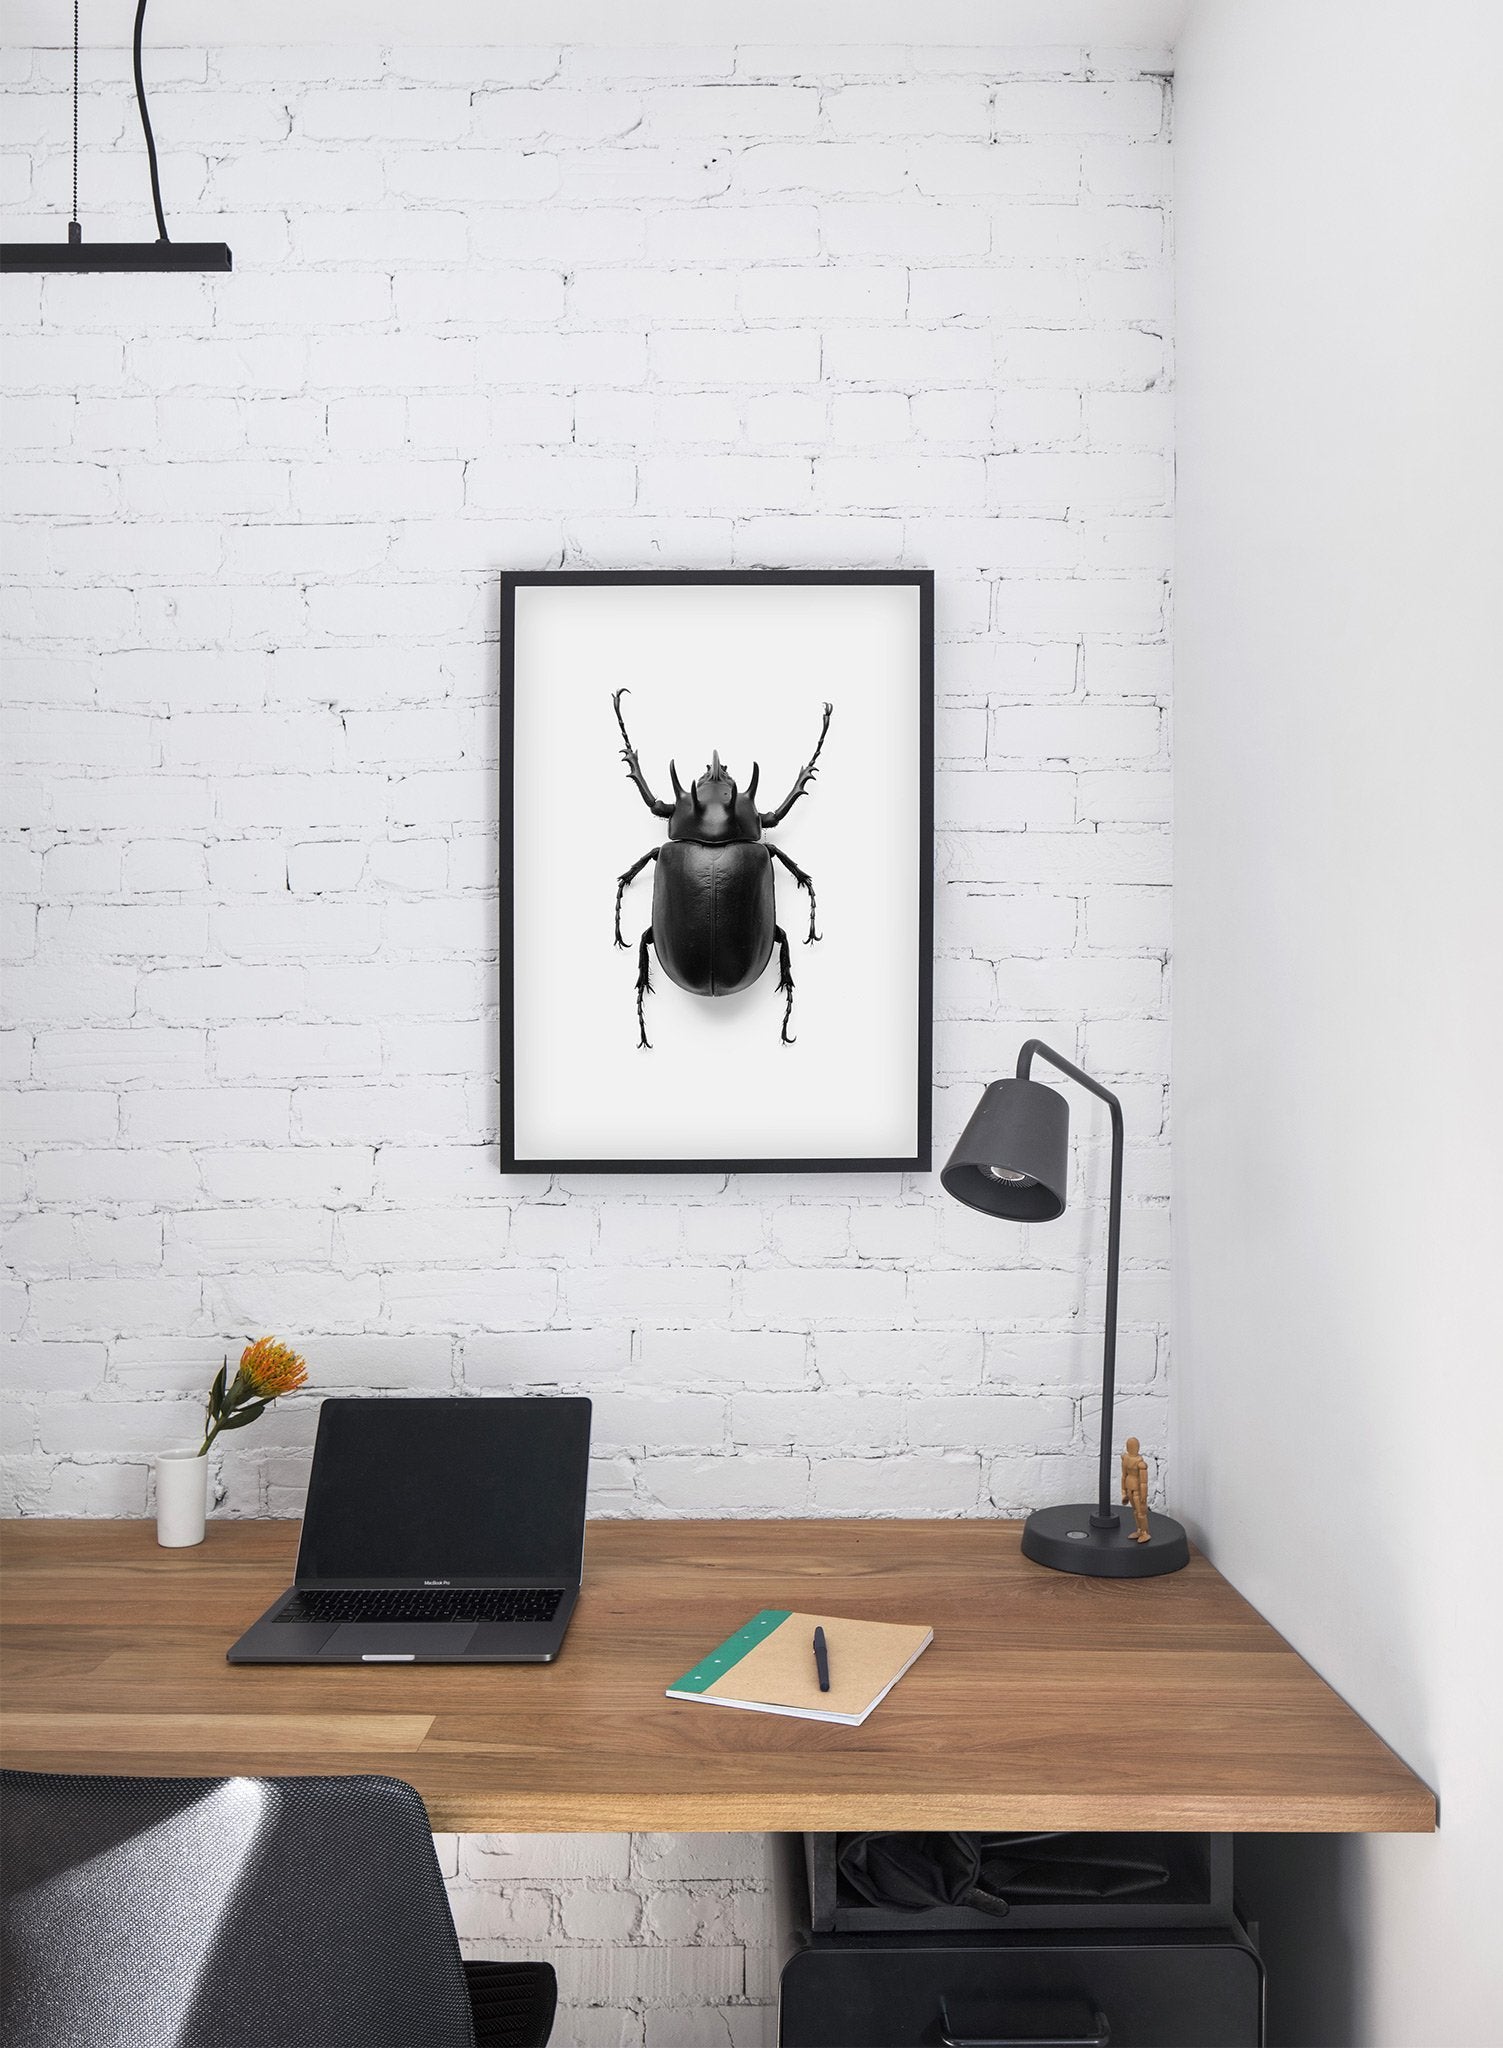 Beetle modern minimalist black and white animal photography poster of black beetle coleptera by Opposite Wall - Office Desk